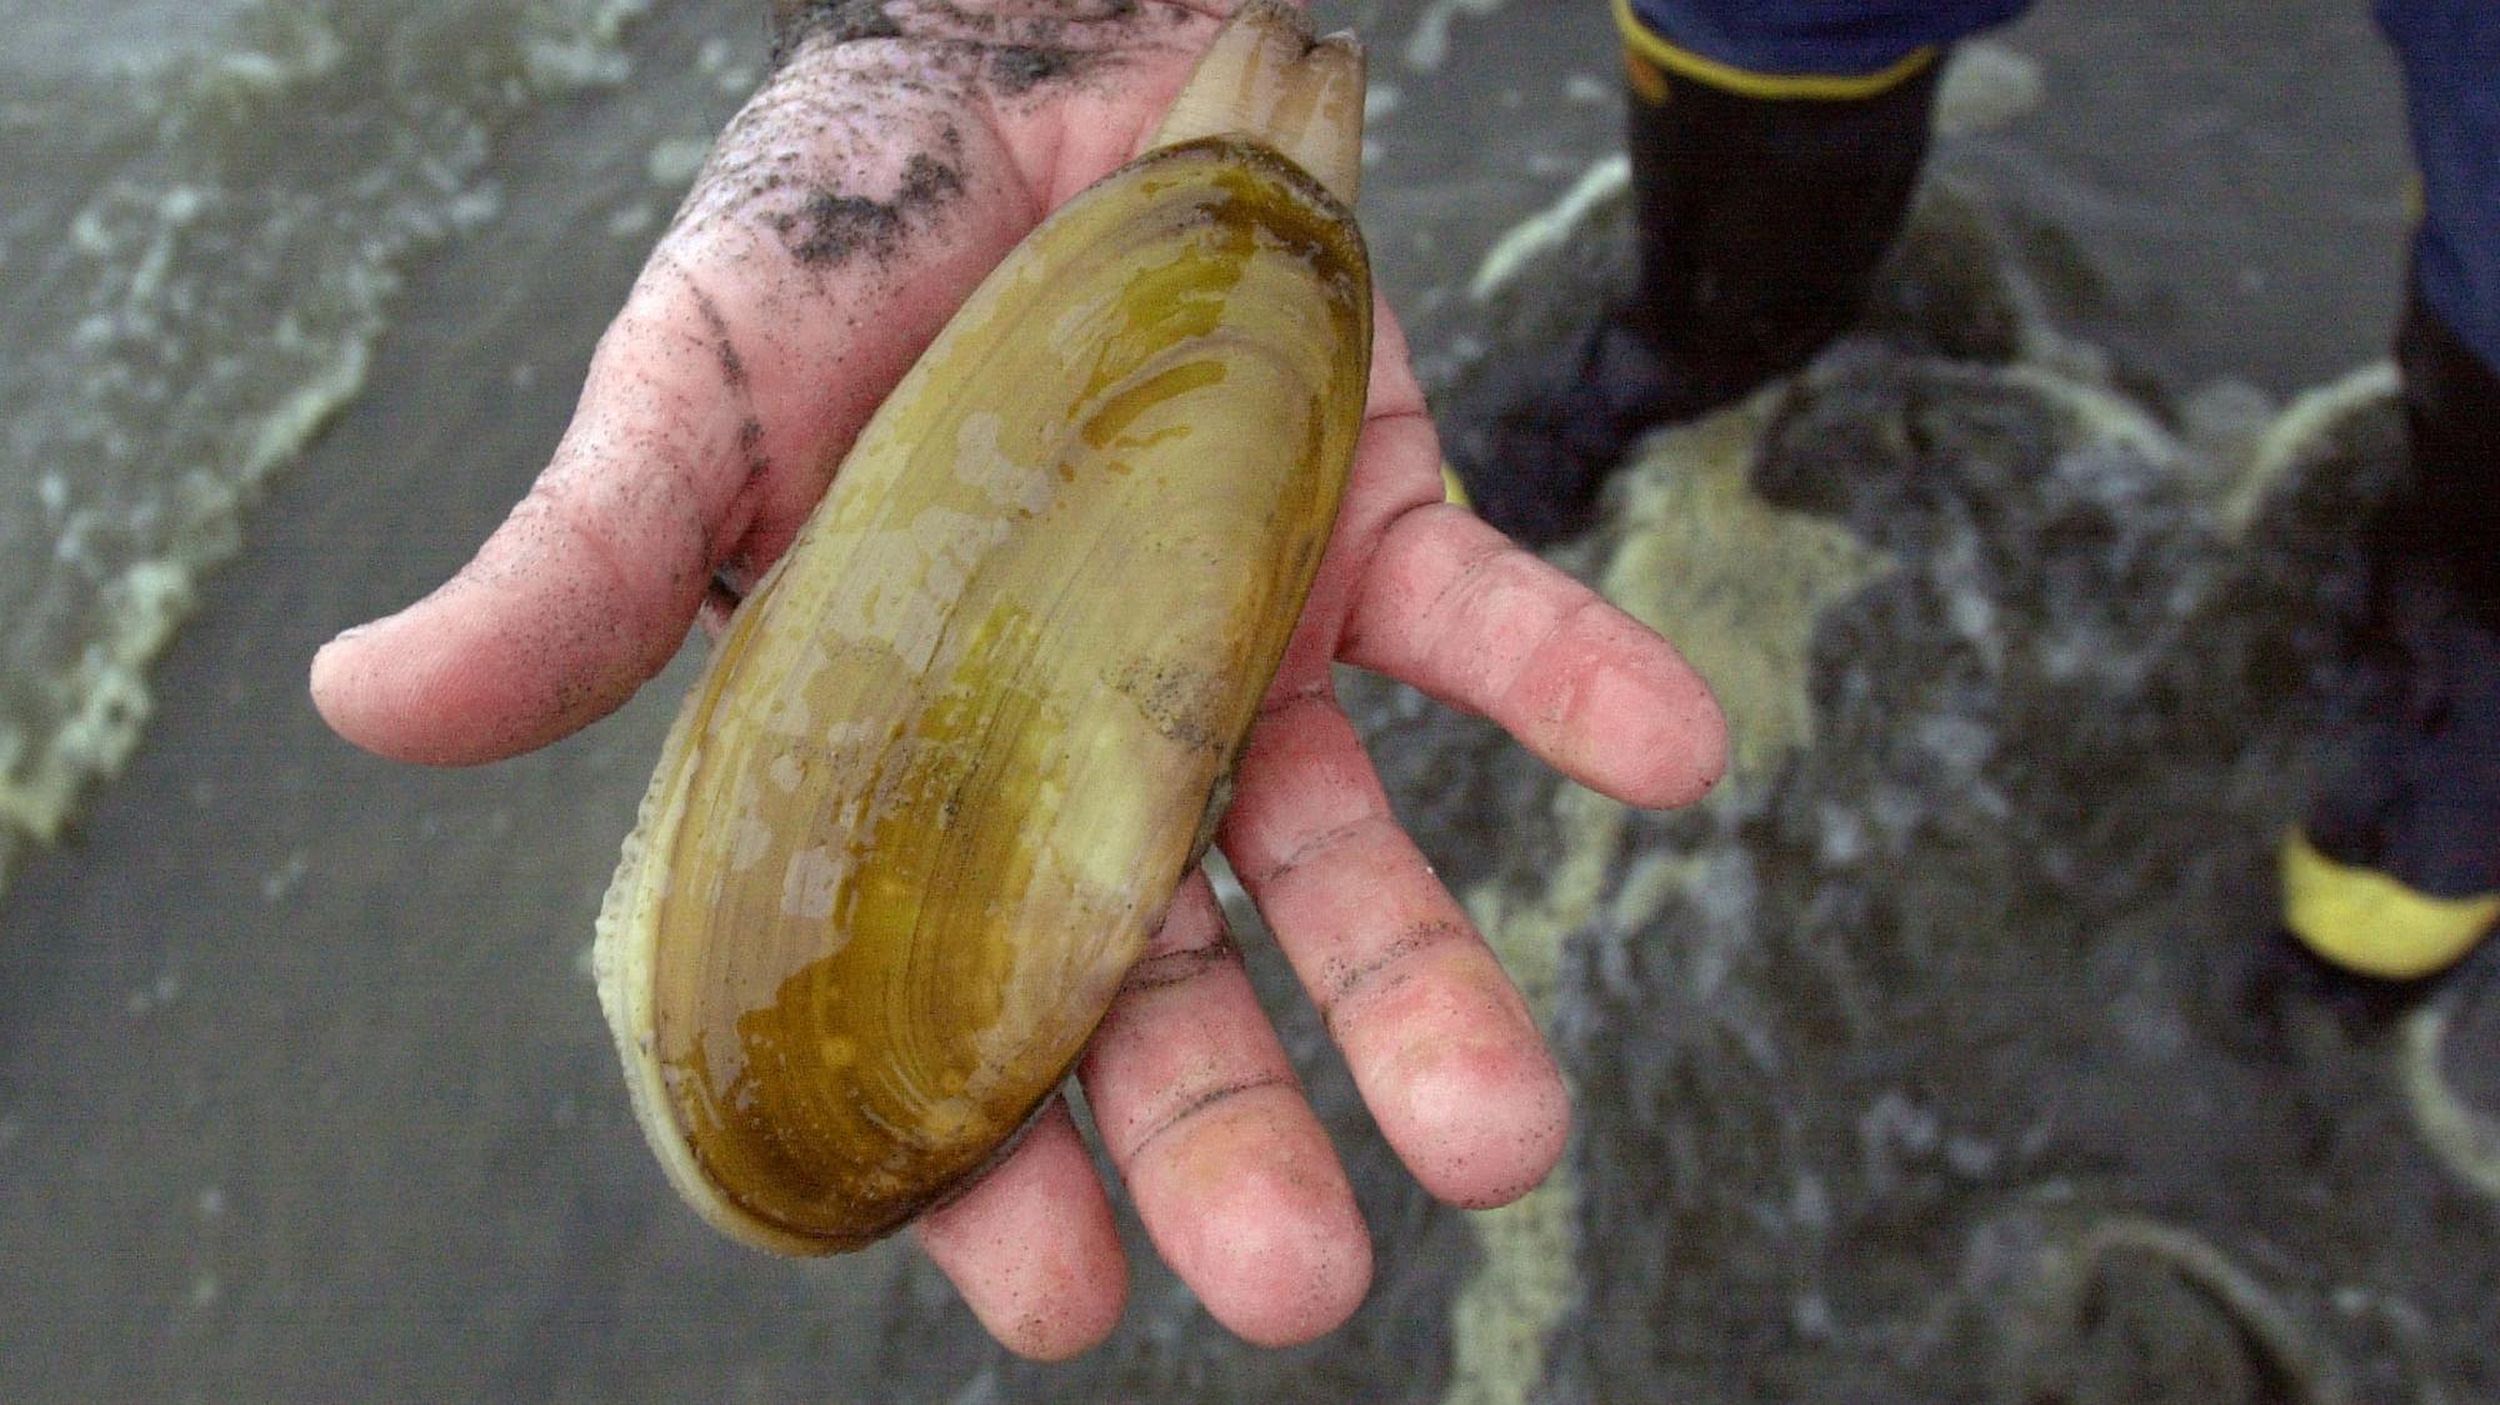 Should razor clam be declared the official state clam?